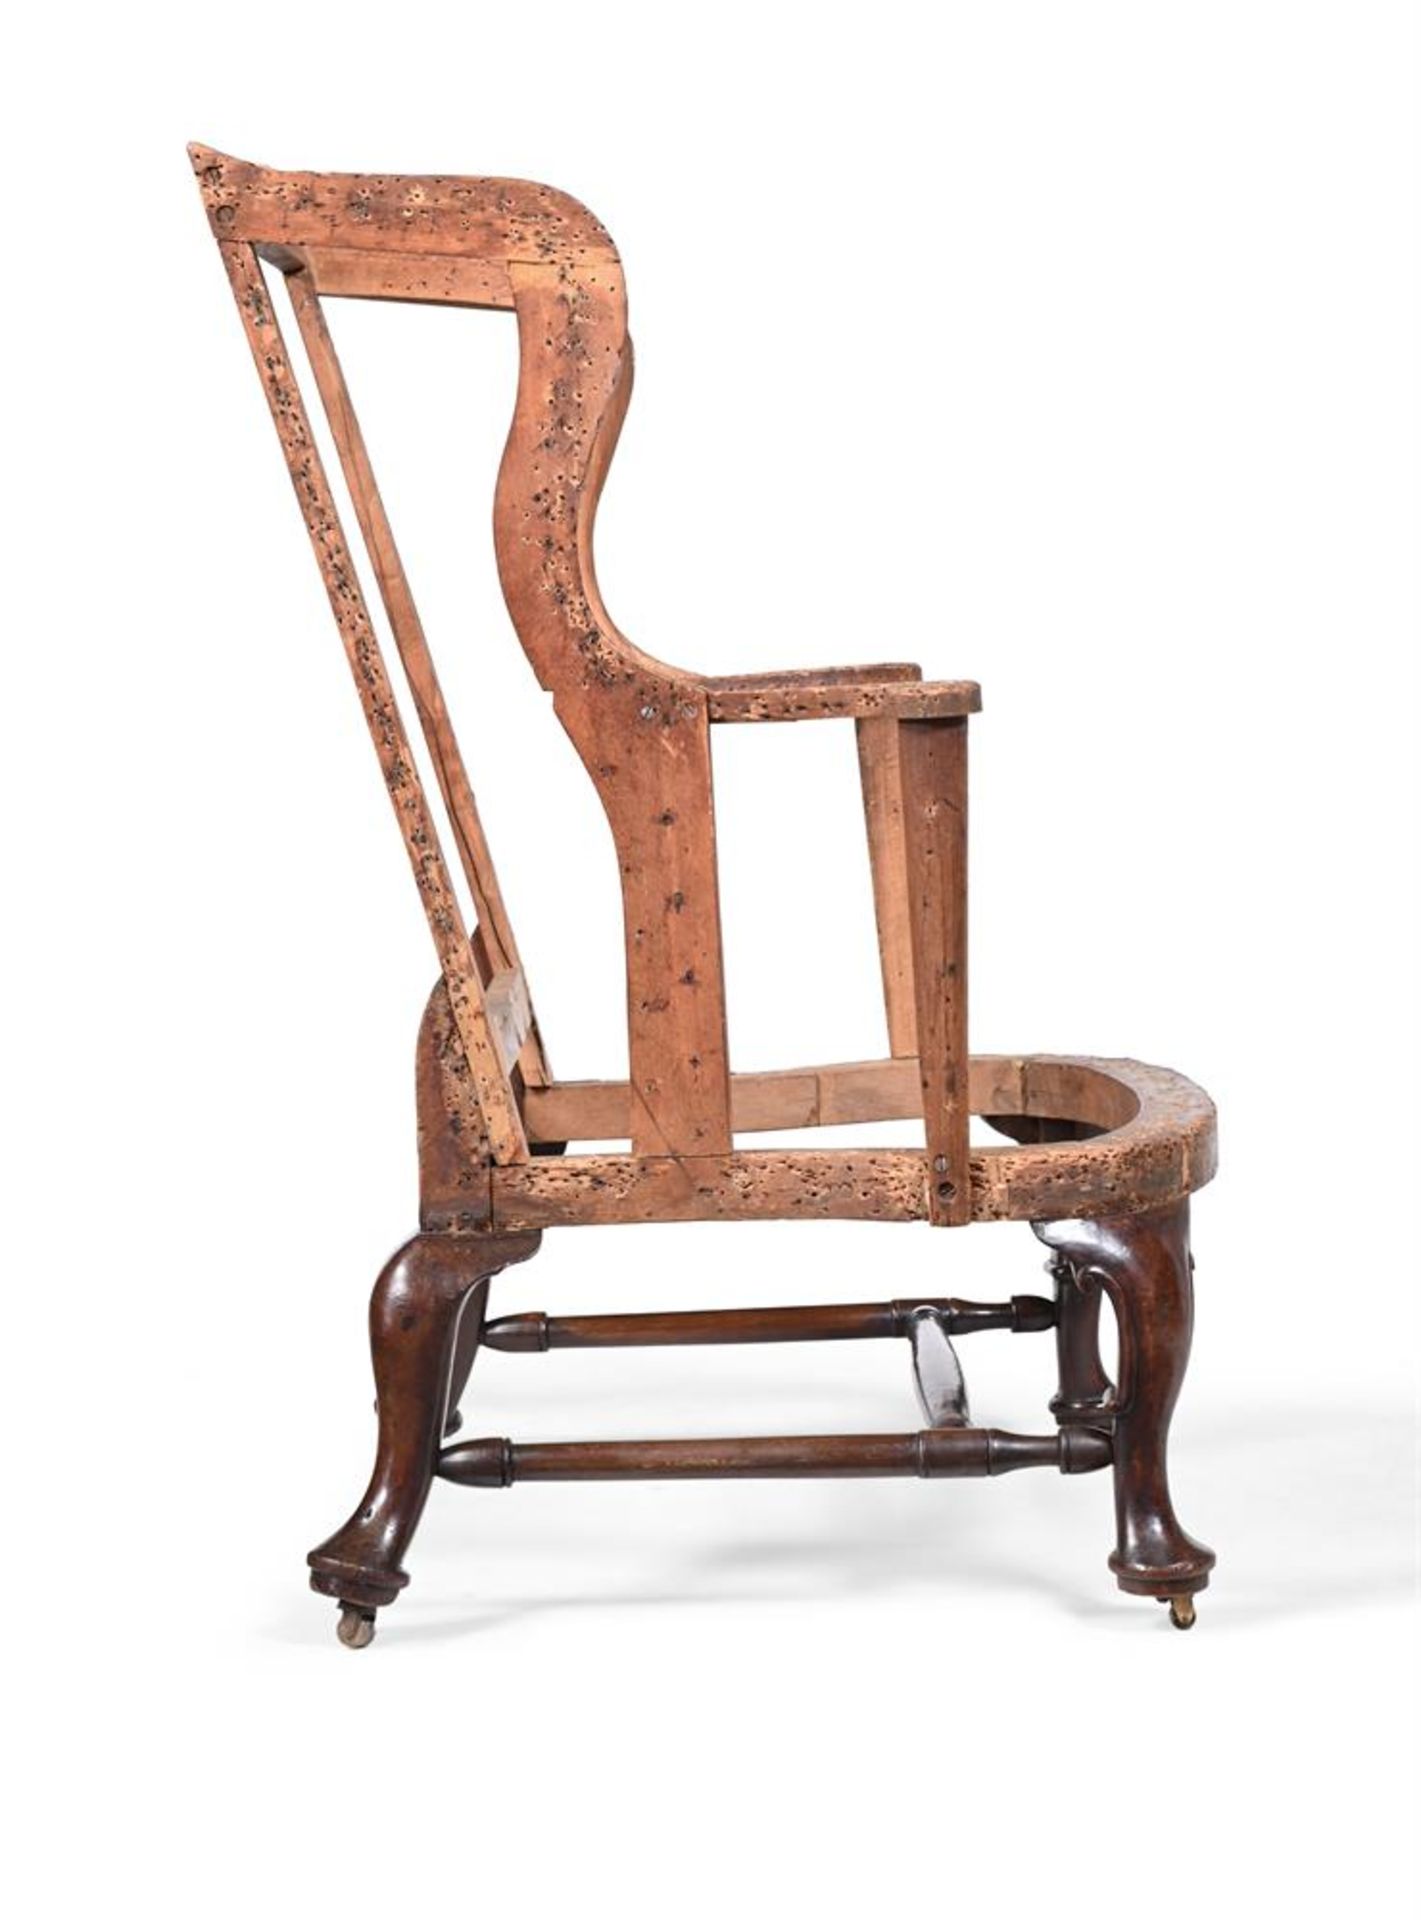 A GEORGE II MAHOGANY WING ARMCHAIR, MID 18TH CENTURY - Image 2 of 5